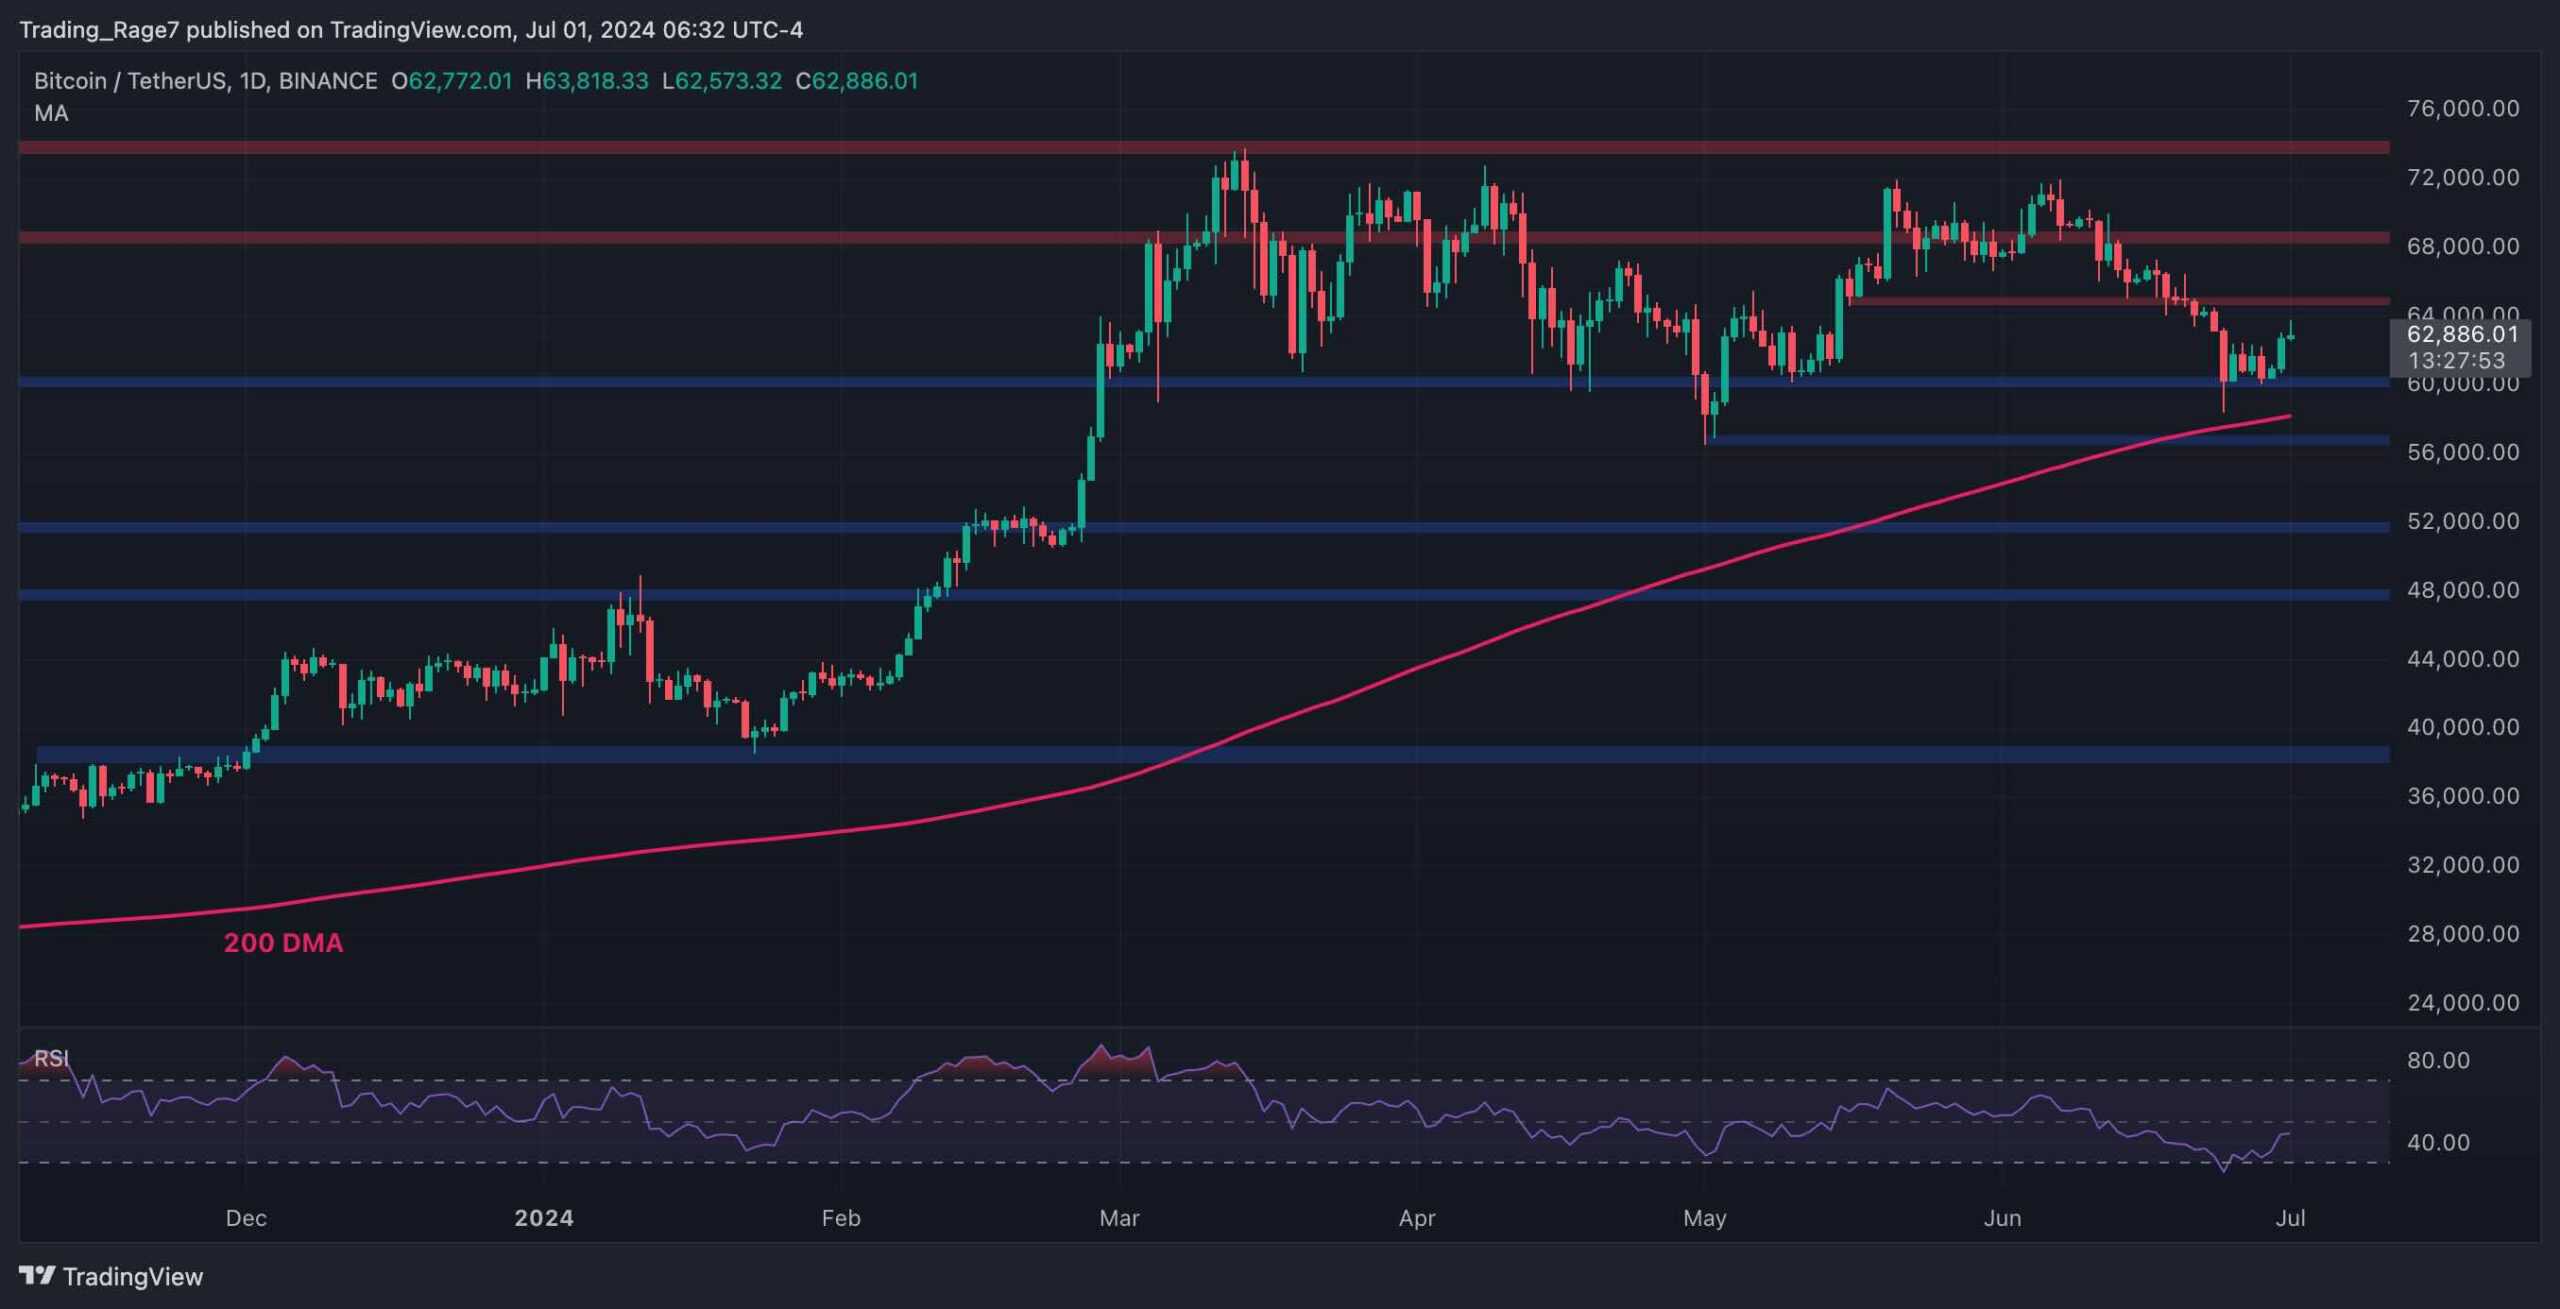 Bitcoin Price Analysis: Is the BTC Correction Over Following Latest Move to $63K?